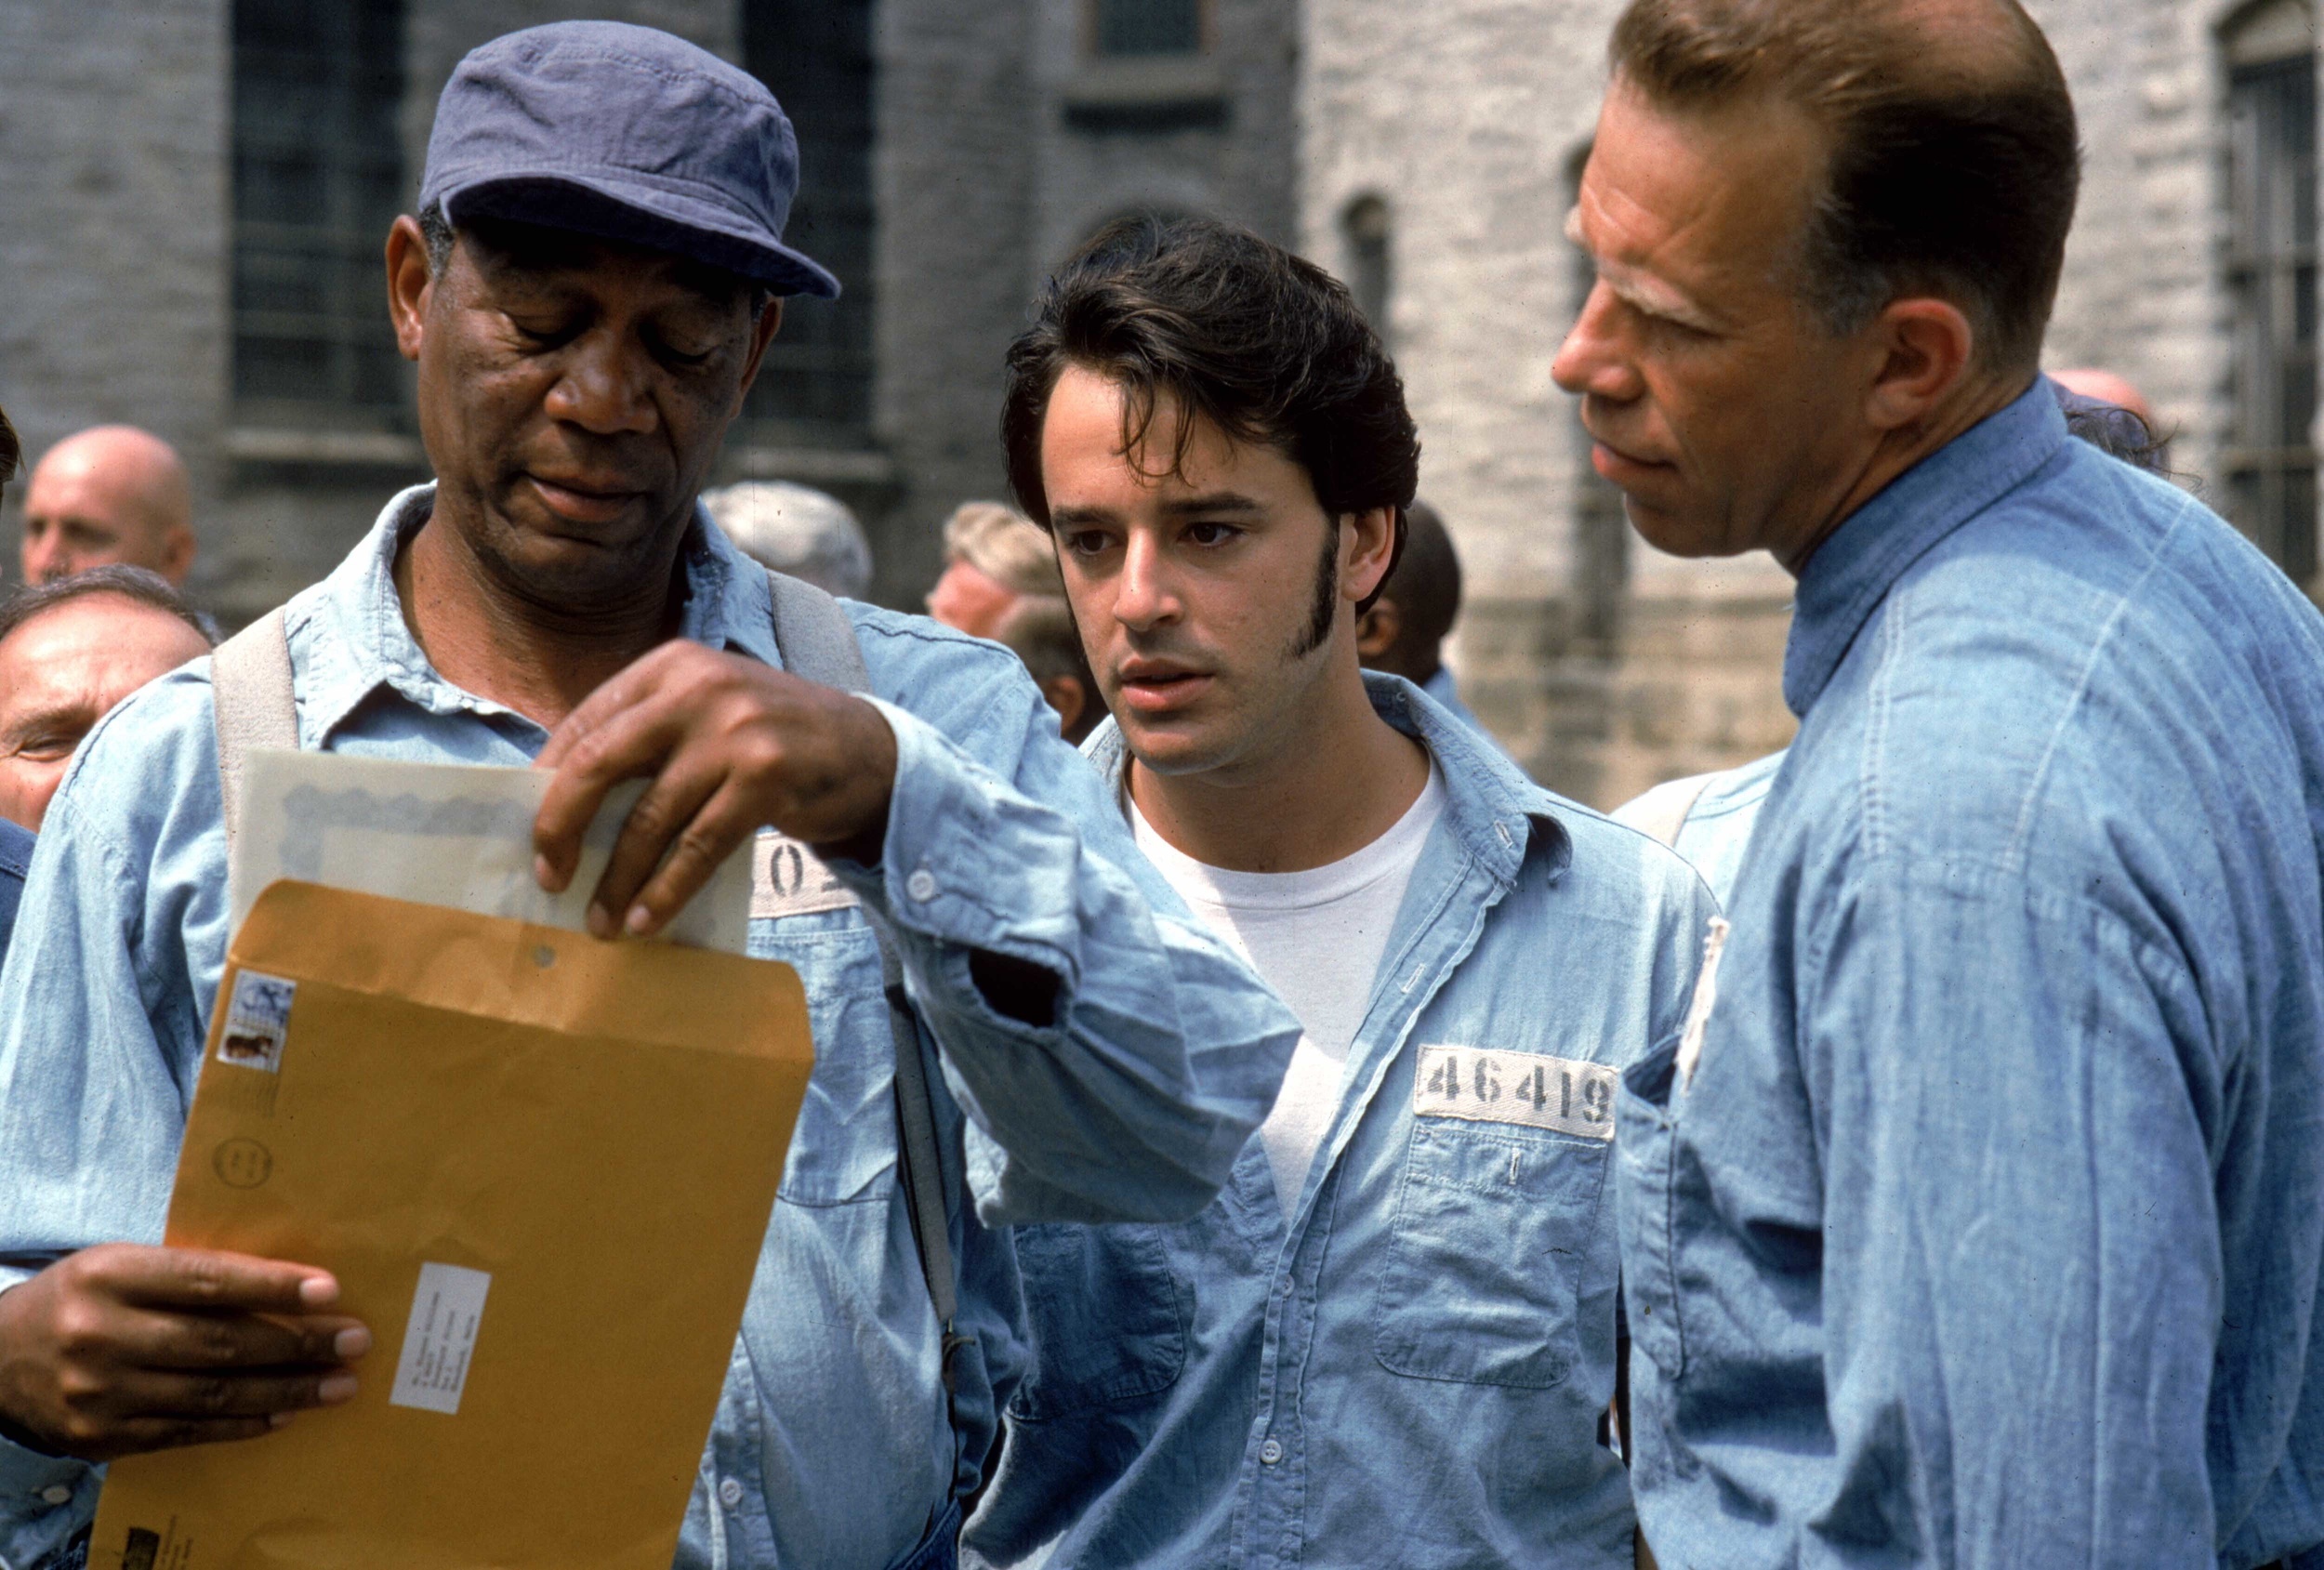 <p>We started with Andy’s most-quoted line, and this is Red’s. This is Red summing up, eloquently, what Andy has done in his escape from prison. It’s a moment of triumph not just for Andy, but for all the inmates at Shawshank, particularly his friend Red.</p><p>You may also like: <a href='https://www.yardbarker.com/entertainment/articles/20_celebrity_deaths_that_were_written_into_their_tv_shows_113023/s1__39140412'>20 celebrity deaths that were written into their TV shows</a></p>